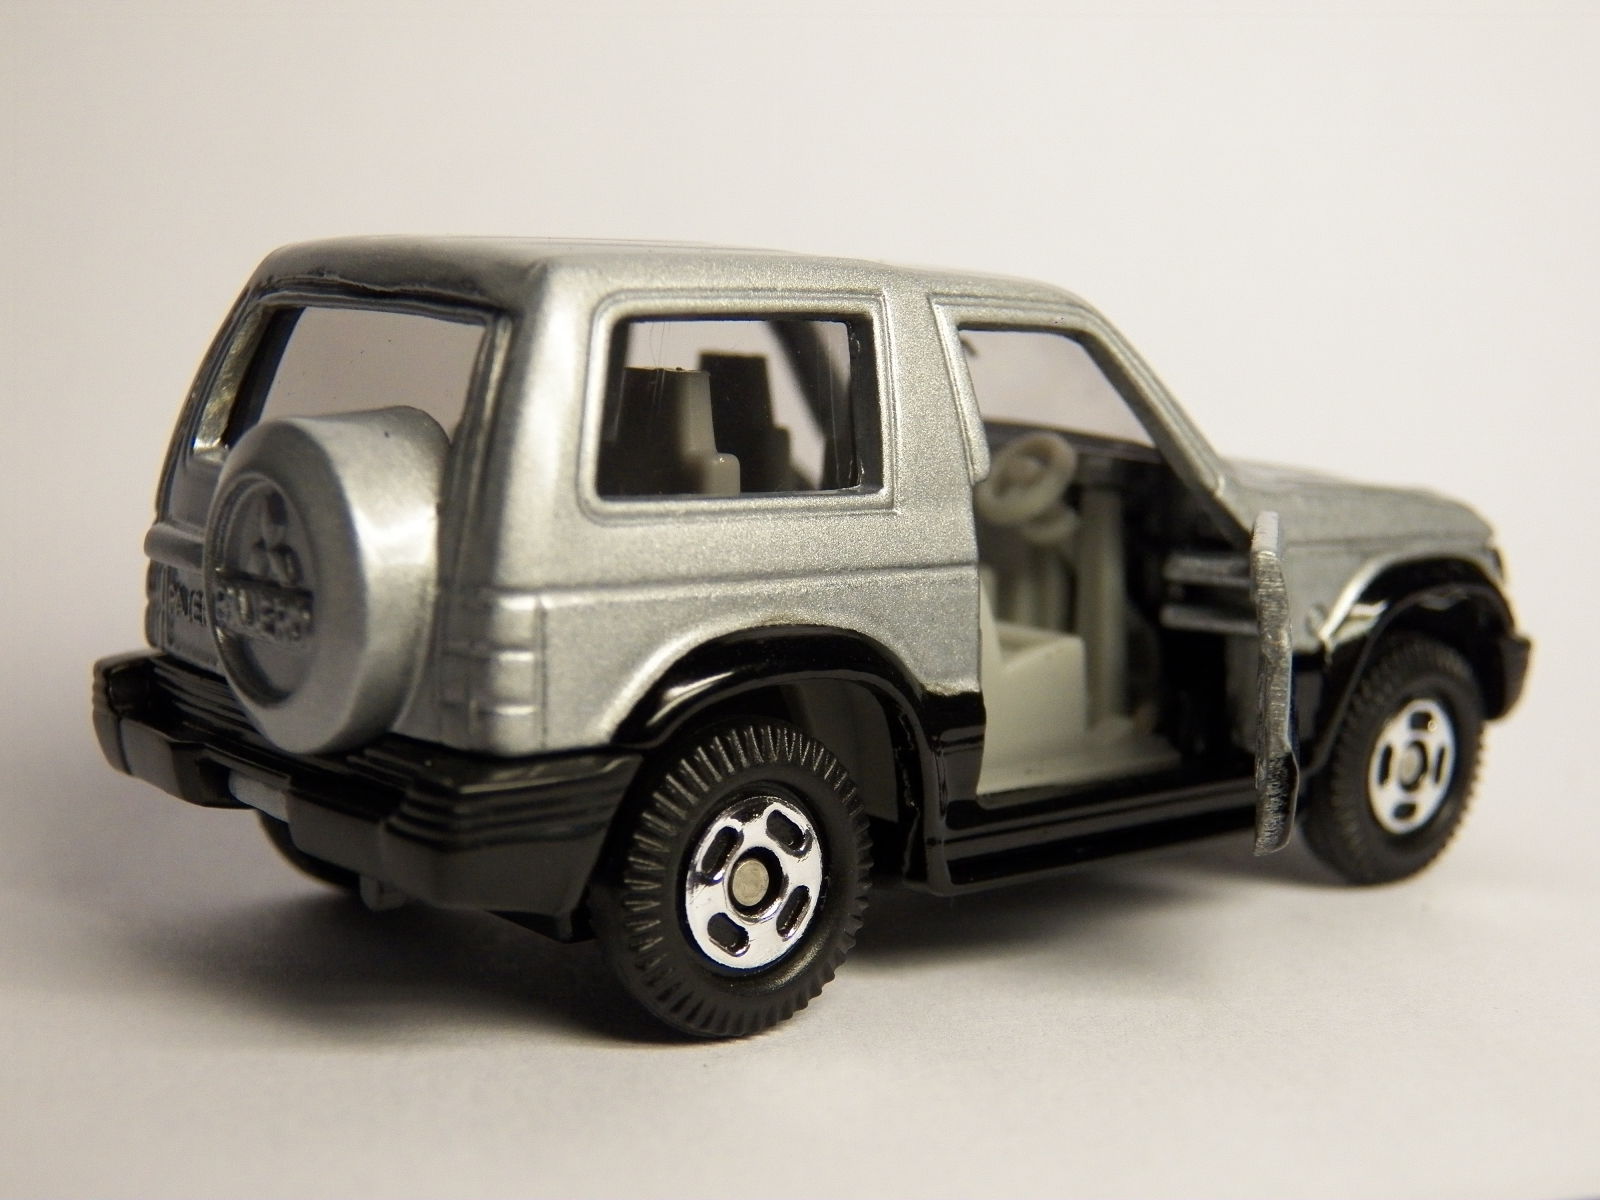 Illustration for article titled Tomica Tuesday Mitsubishi Pajero 1/61 scale